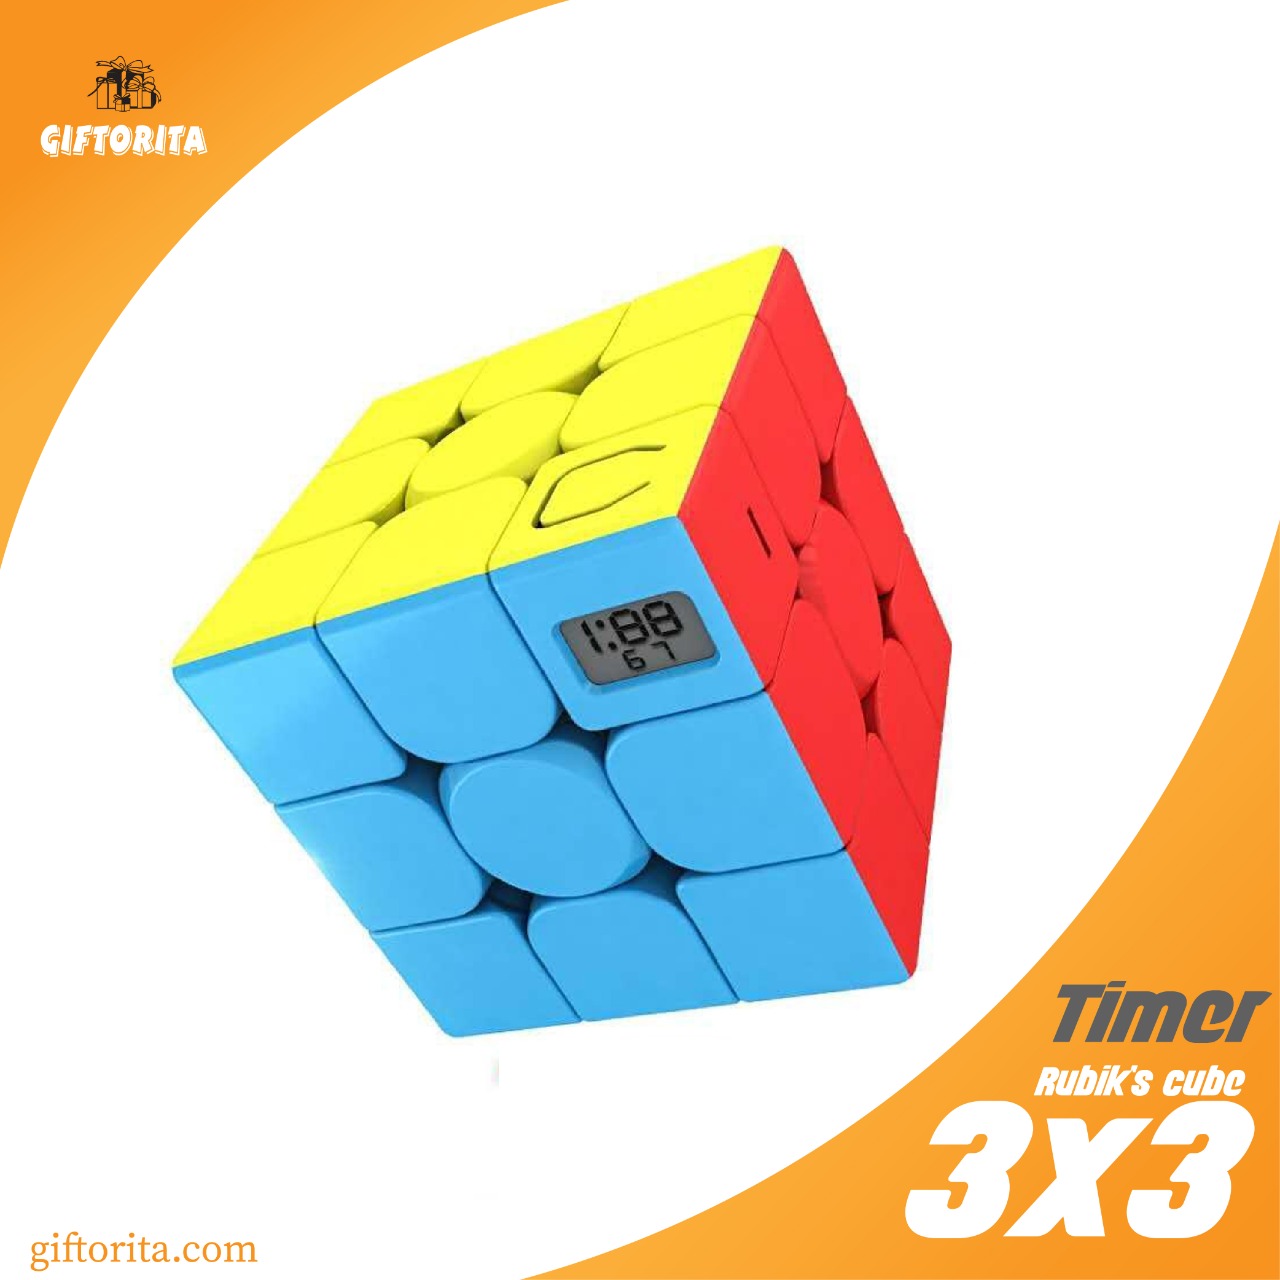 Cubing time. Pomodoro timer Cube.